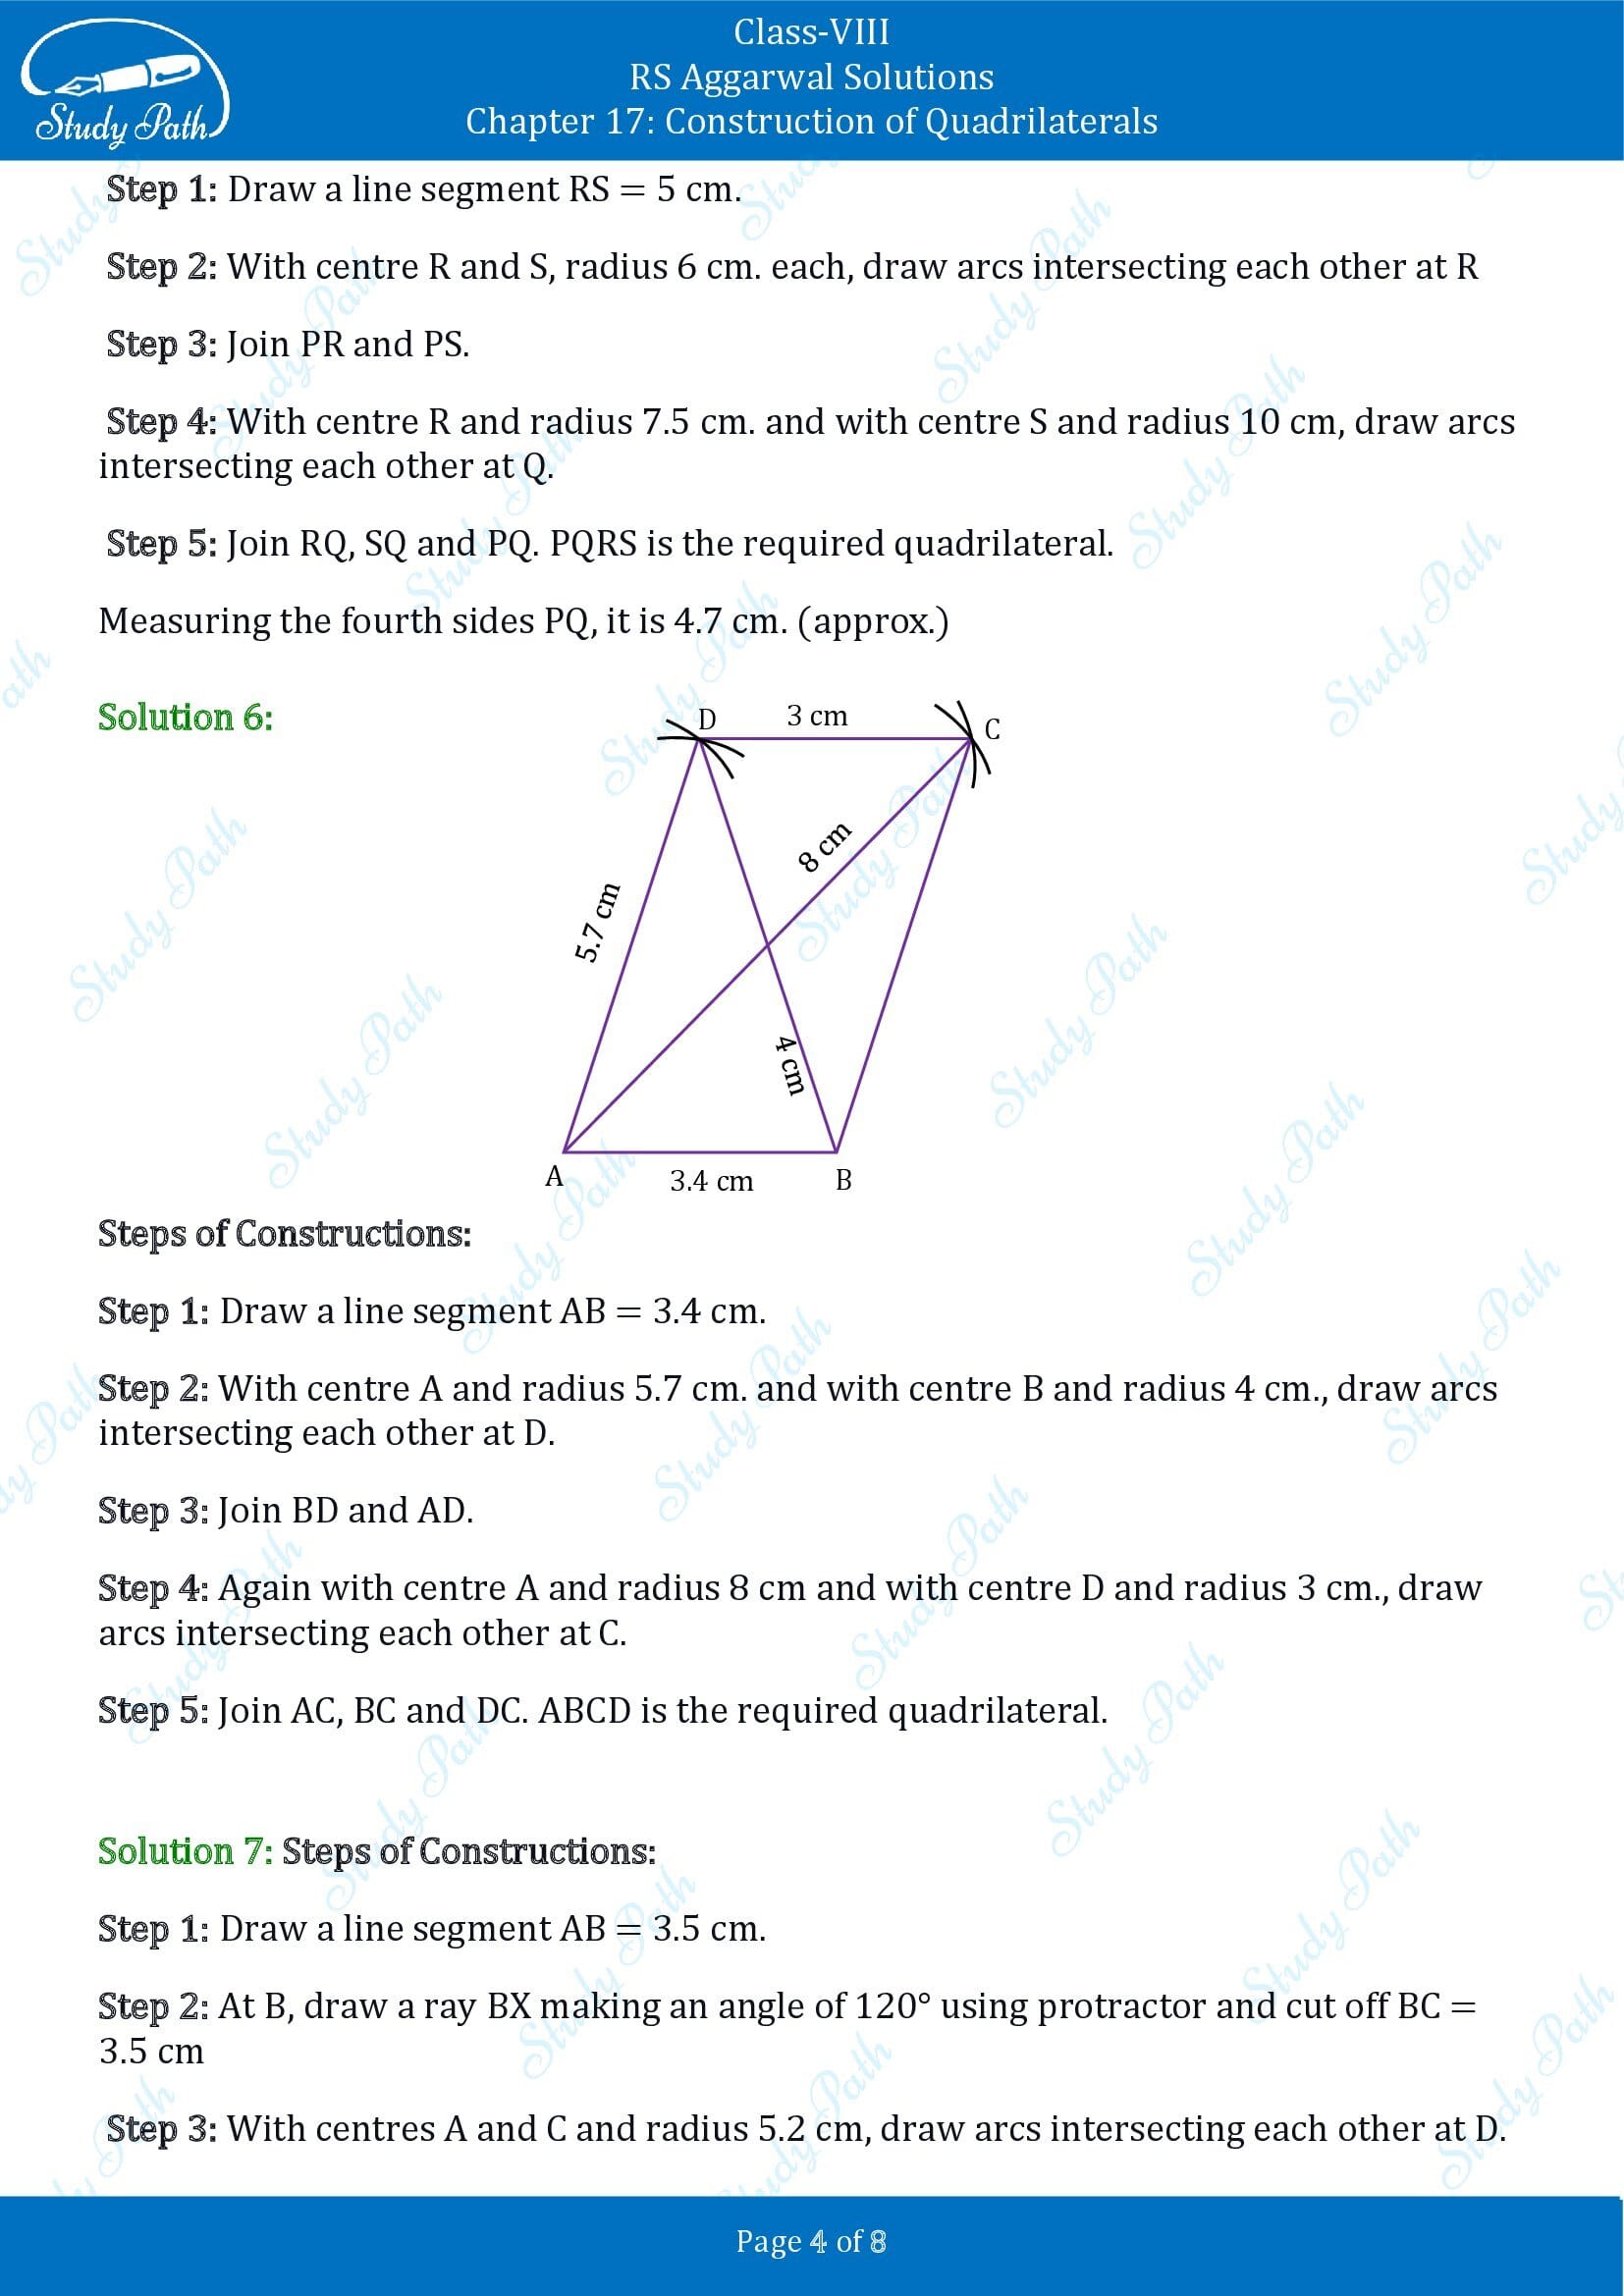 RS Aggarwal Solutions Class 8 Chapter 17 Construction of Quadrilaterals Exercise 17A 00004